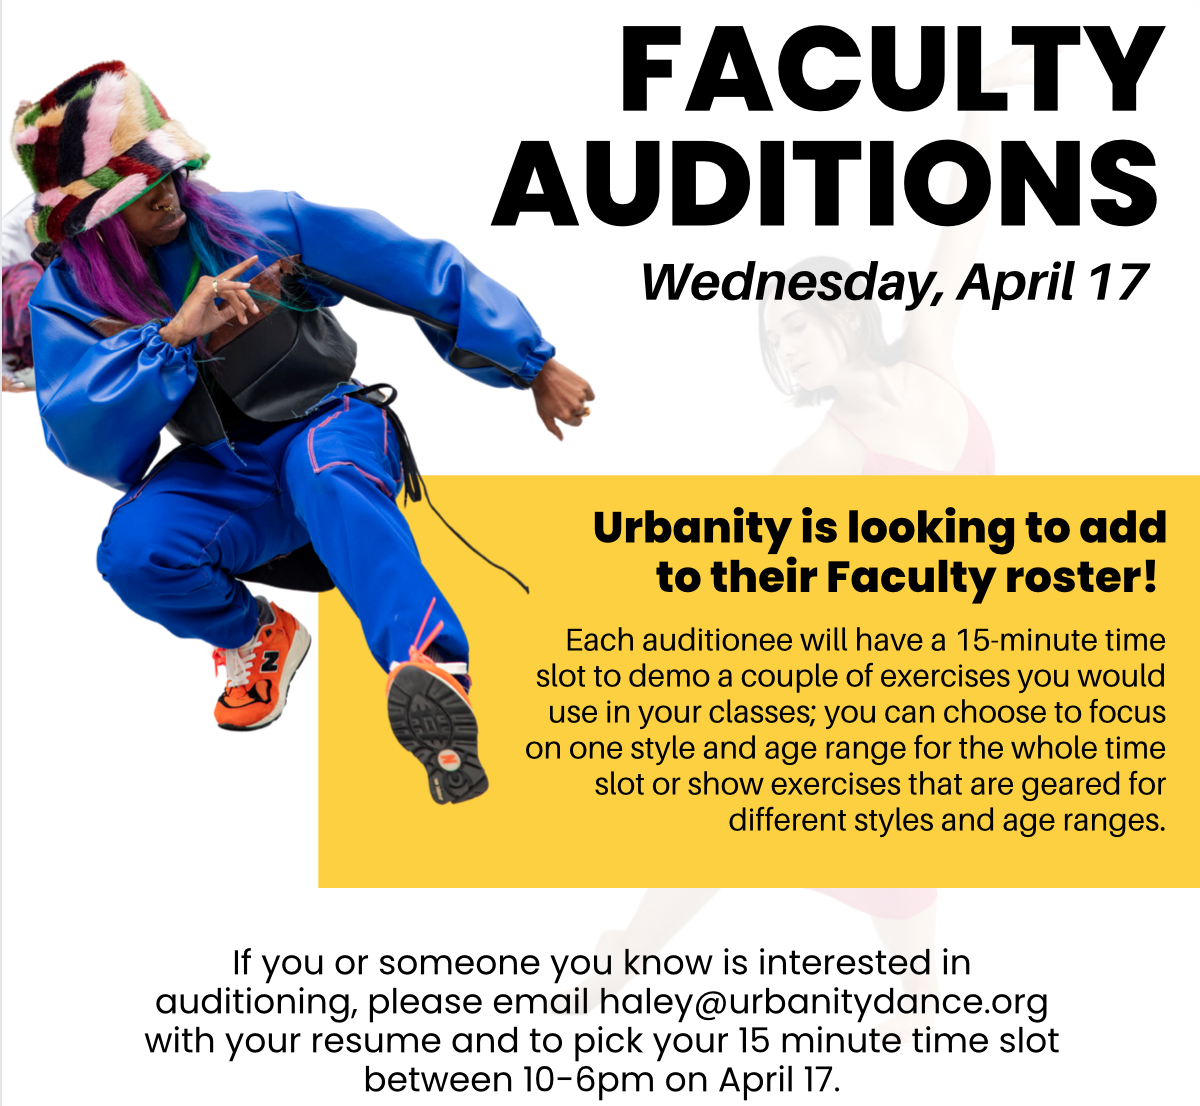 Faculty auditions poster with information about the job and how to apply